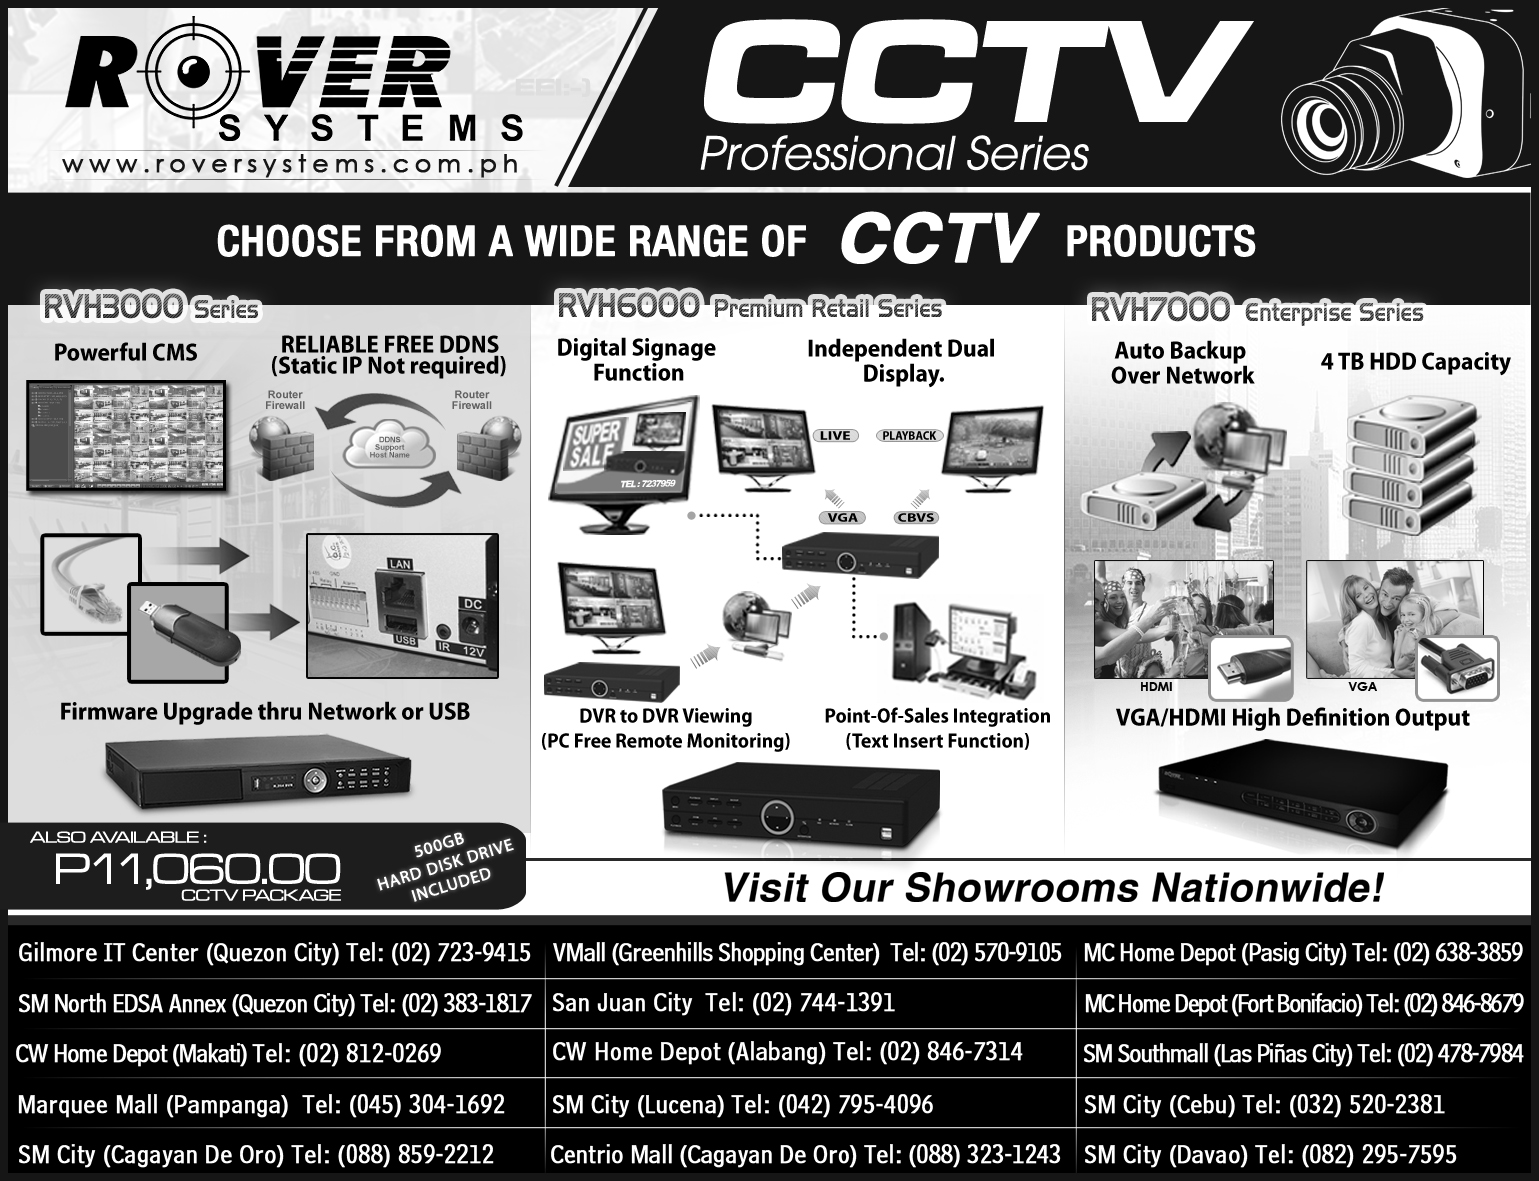 Rover Systems Newspaper Ad (June - August 2013) - CCTV ...